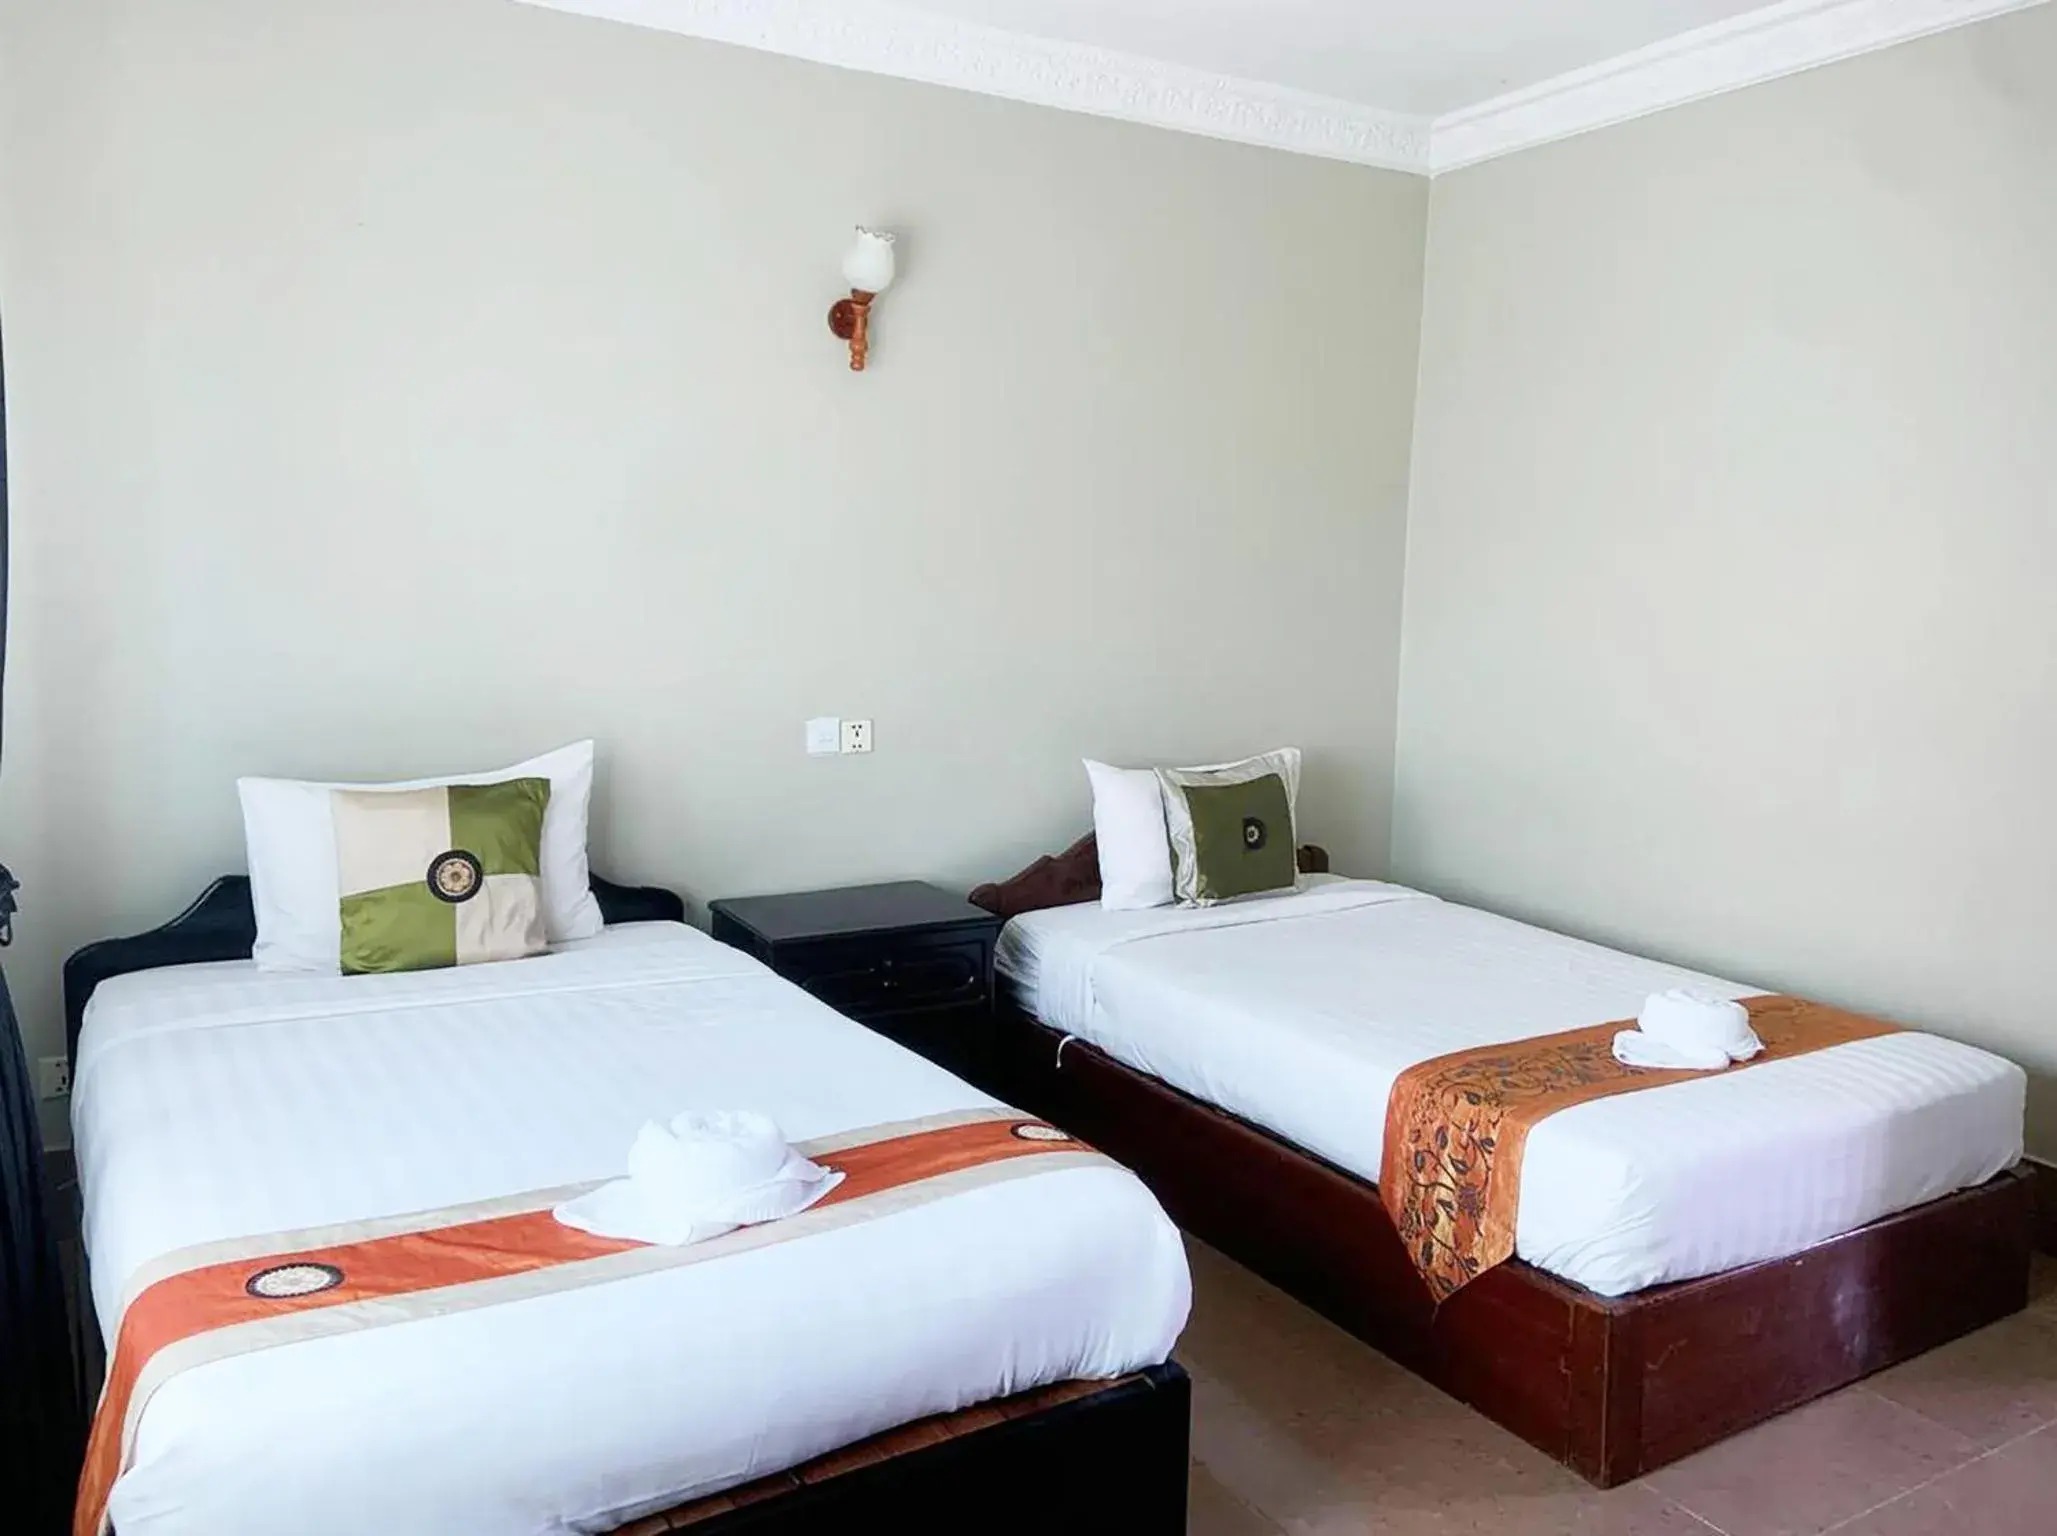 Property building, Bed in Central Night Hotel